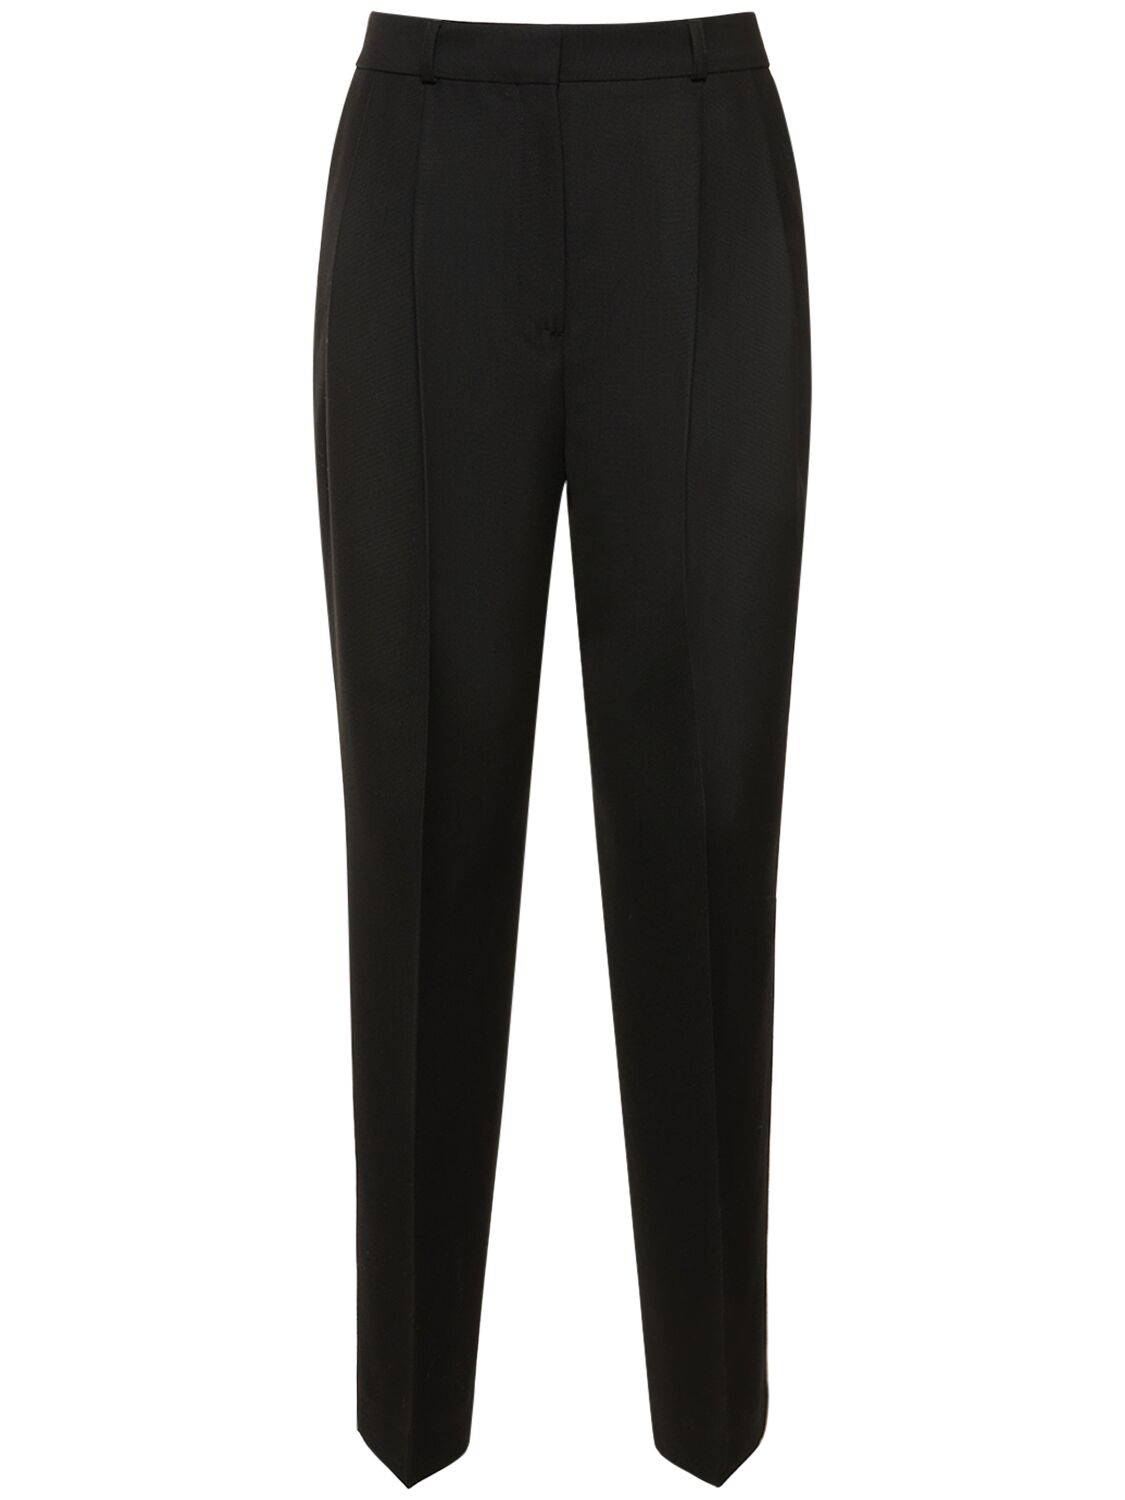 Image of Double-pleated Tailored Wool Blend Pants